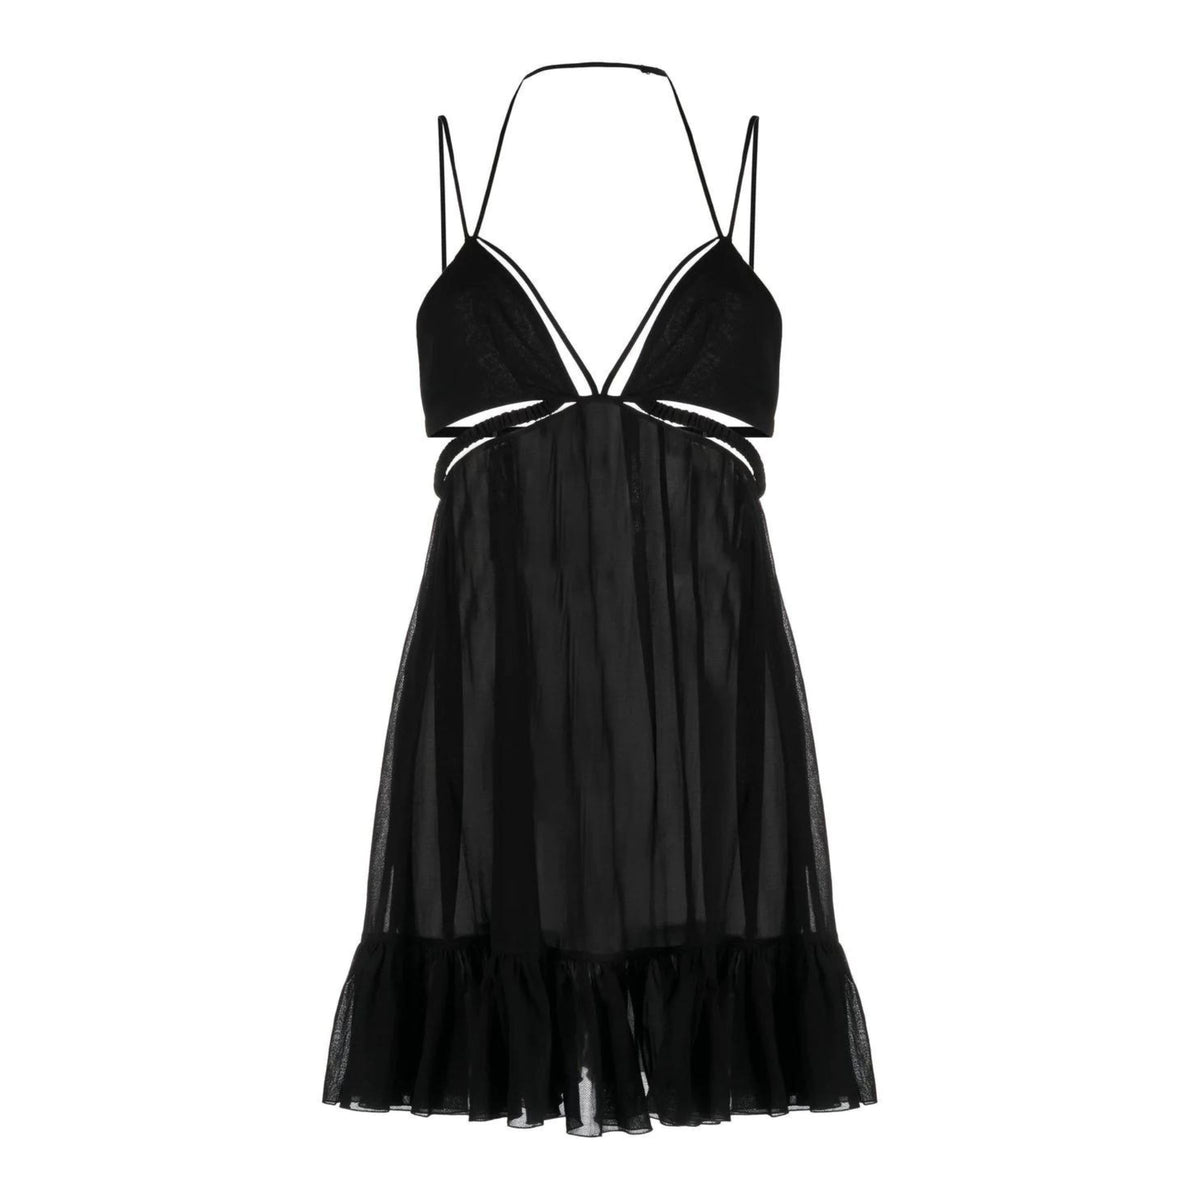 Cut-out Strappy Minidress